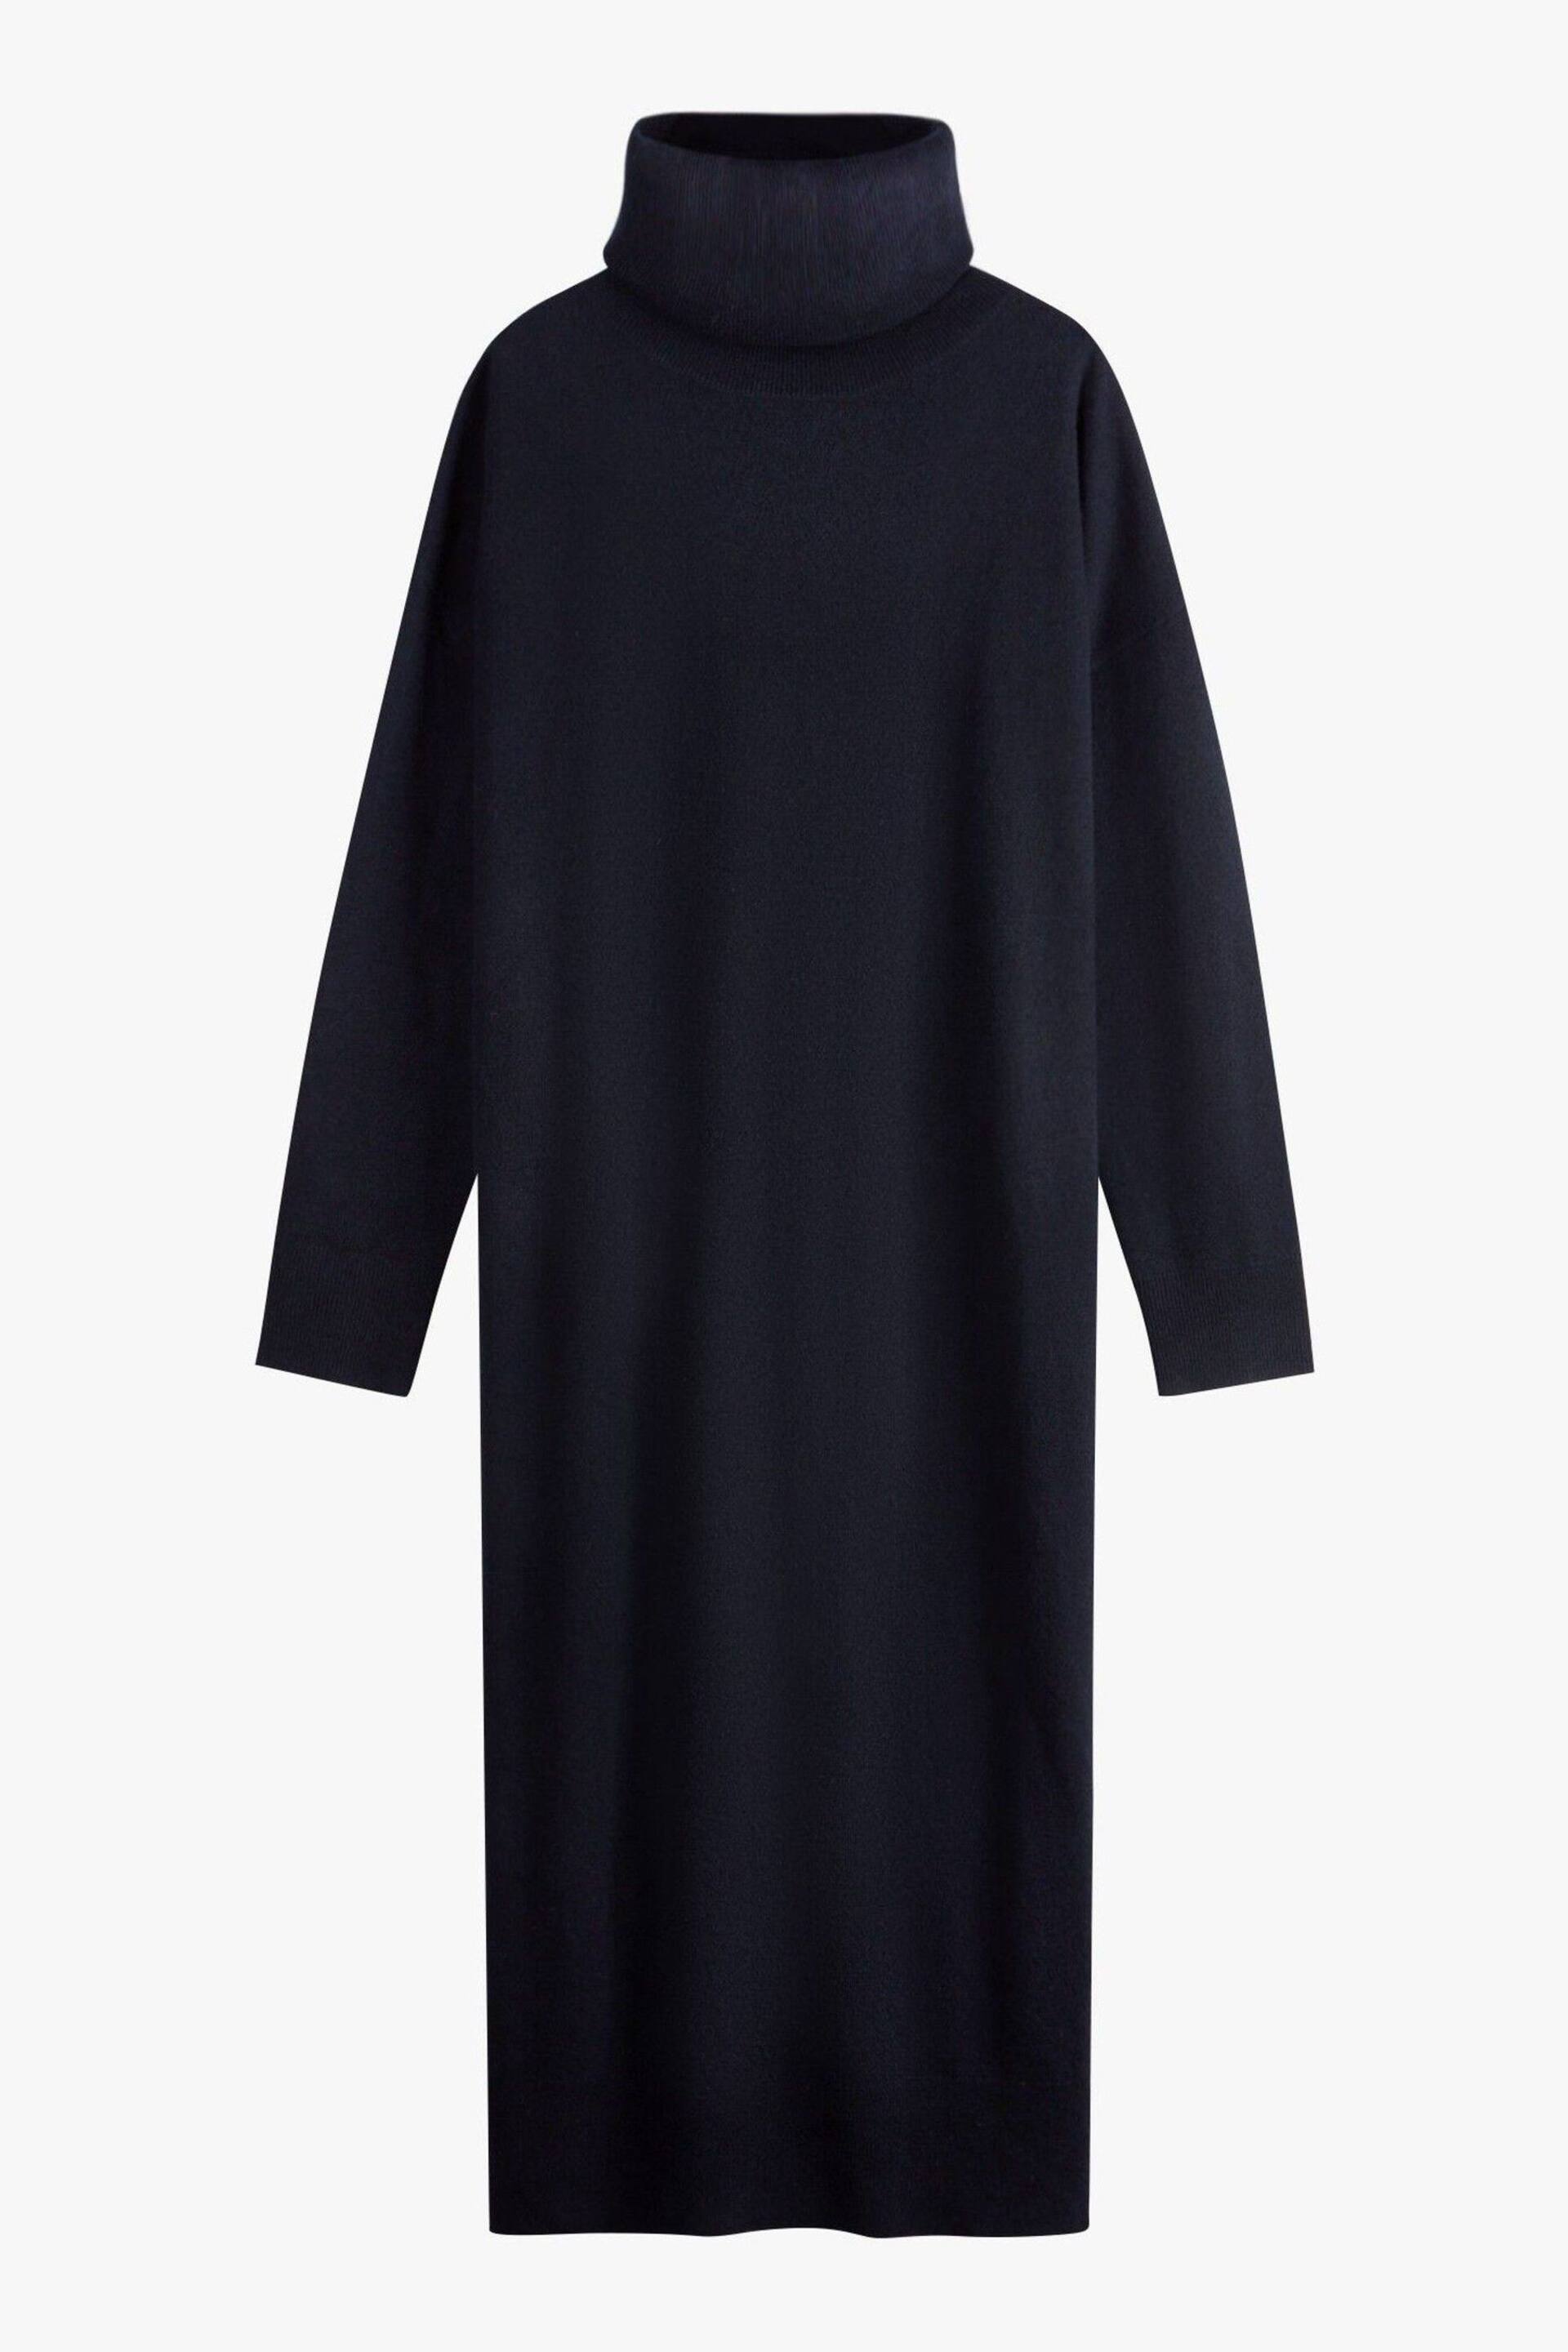 Hush Blue Roll Neck Knitted Dress - Image 5 of 5